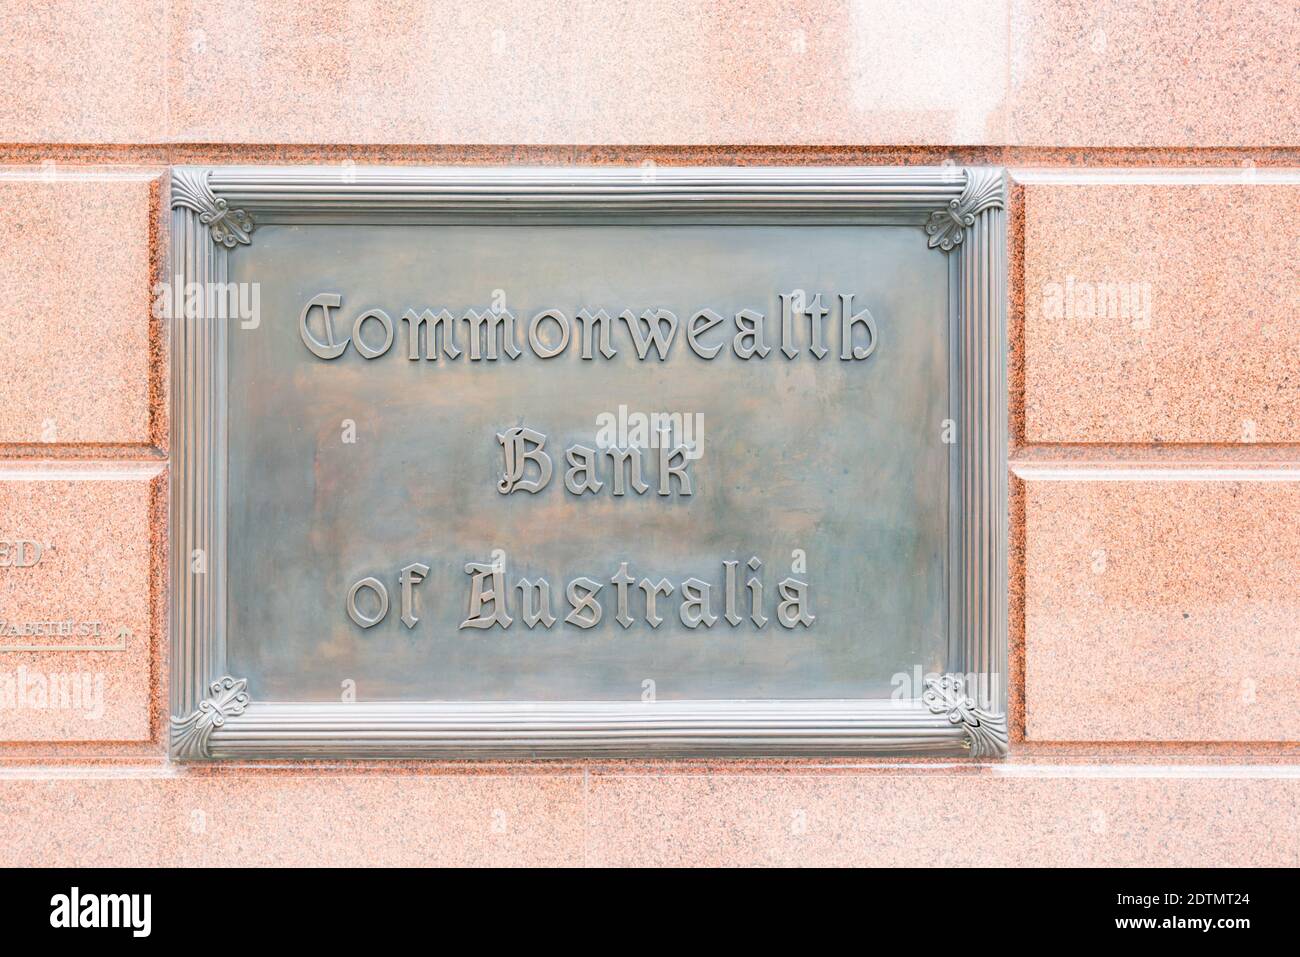 A large heritage item, bronze plaque for the Commonwealth Bank of Australia (CBA) outside one of its old branches in Sydney city, Australia Stock Photo